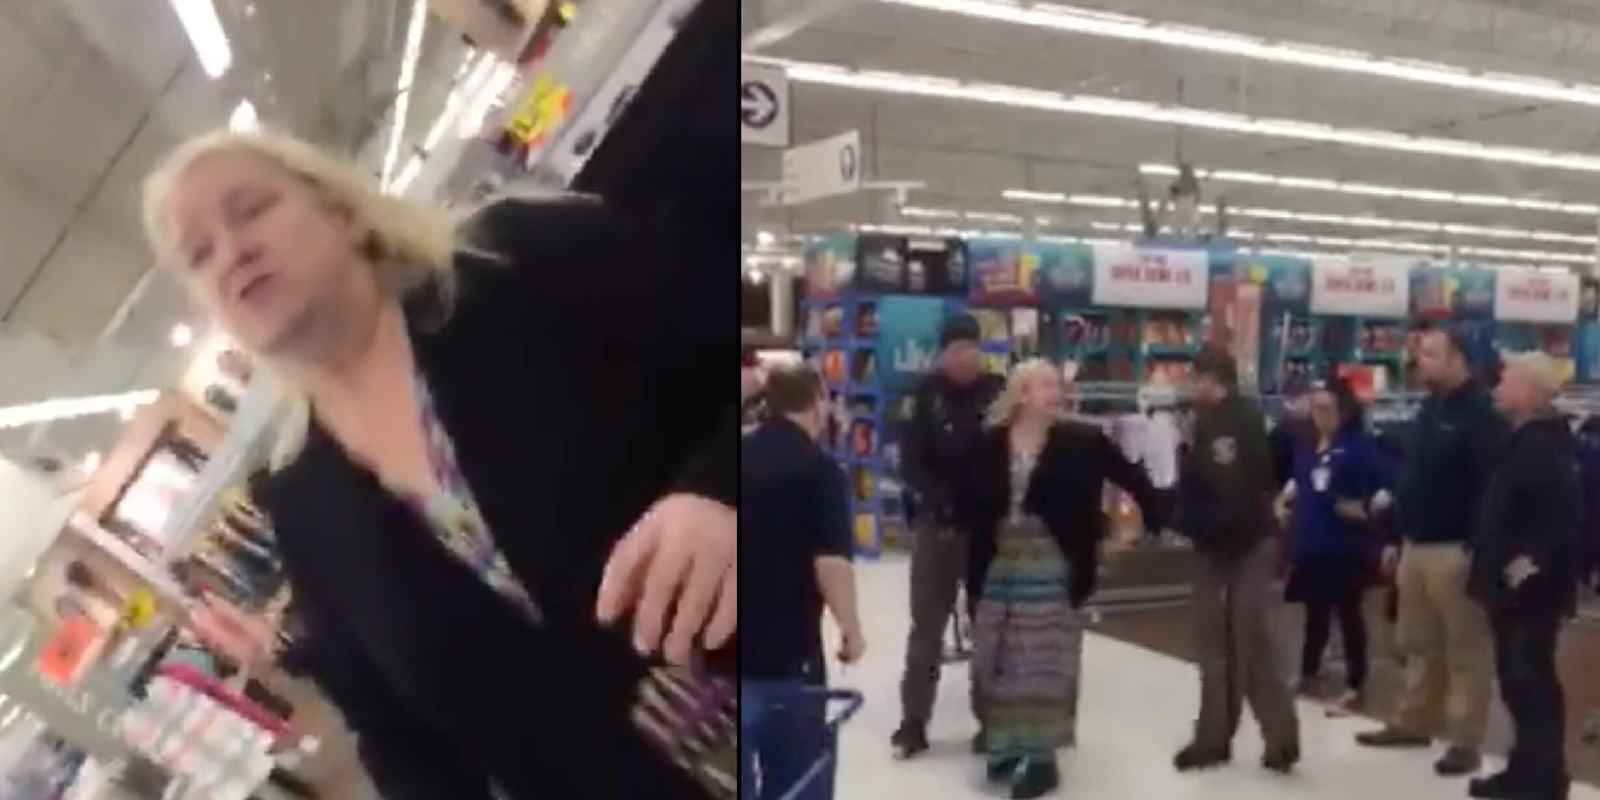 White woman seen screaming at Meijer's store